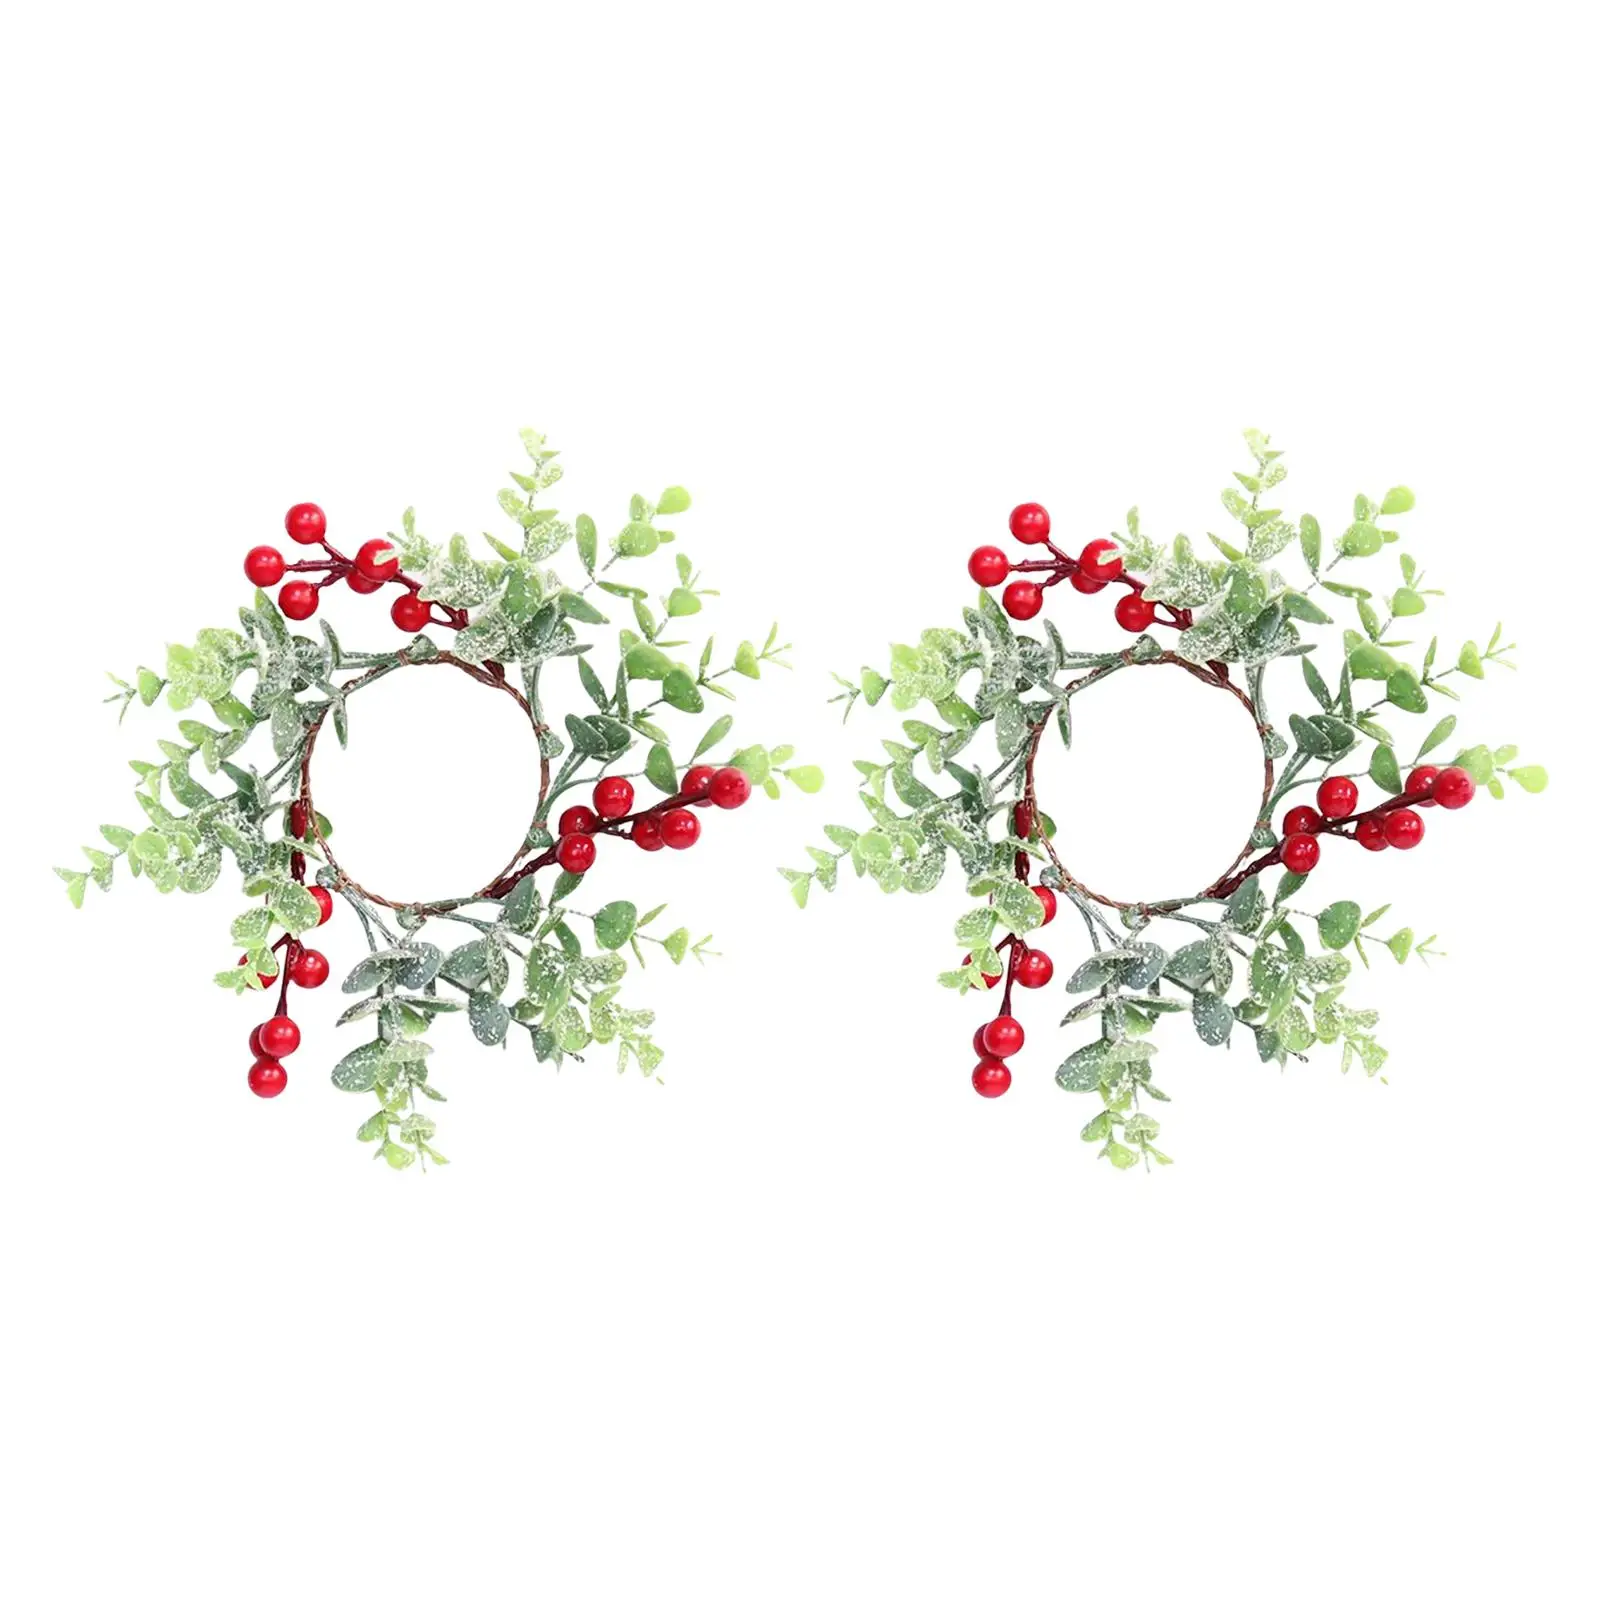 2 Pieces Easter Candle Rings Rustic Candles Holder Simulated Wreath for Living Room Home Decorations Holiday Festivals Fireplace